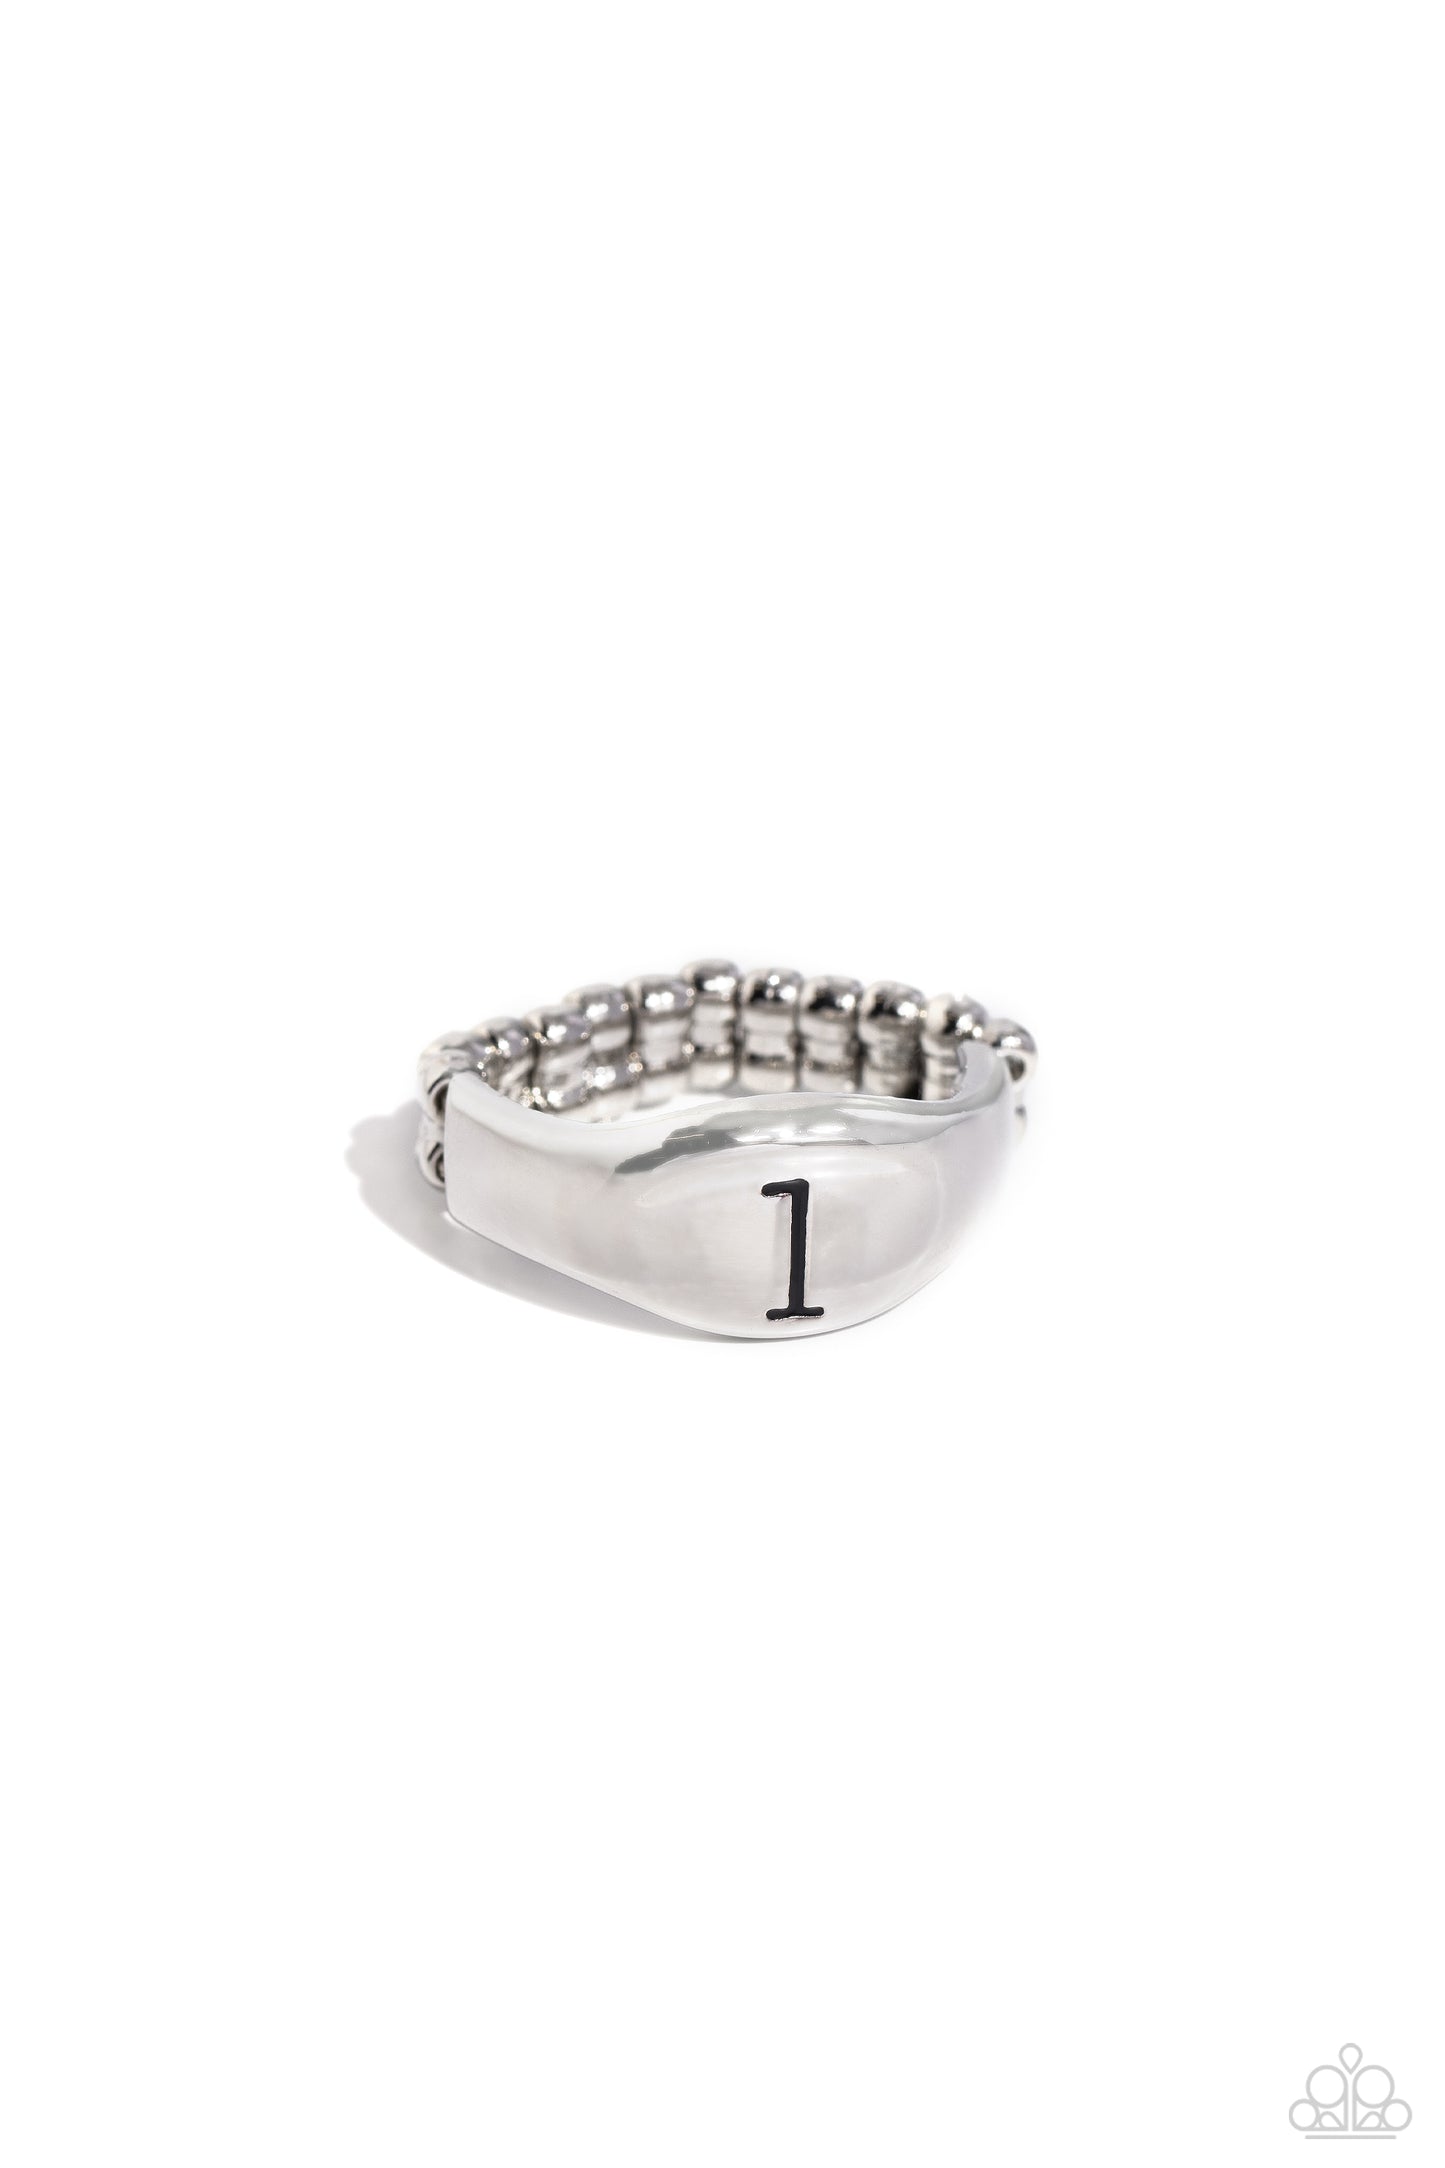 <p>Pressed into the center of a beveled silver band, the black letter "l" stands out for a simple, sentimental centerpiece. Features a stretchy band for a flexible fit.</p> <p><i> Sold as one individual ring.</i></p>